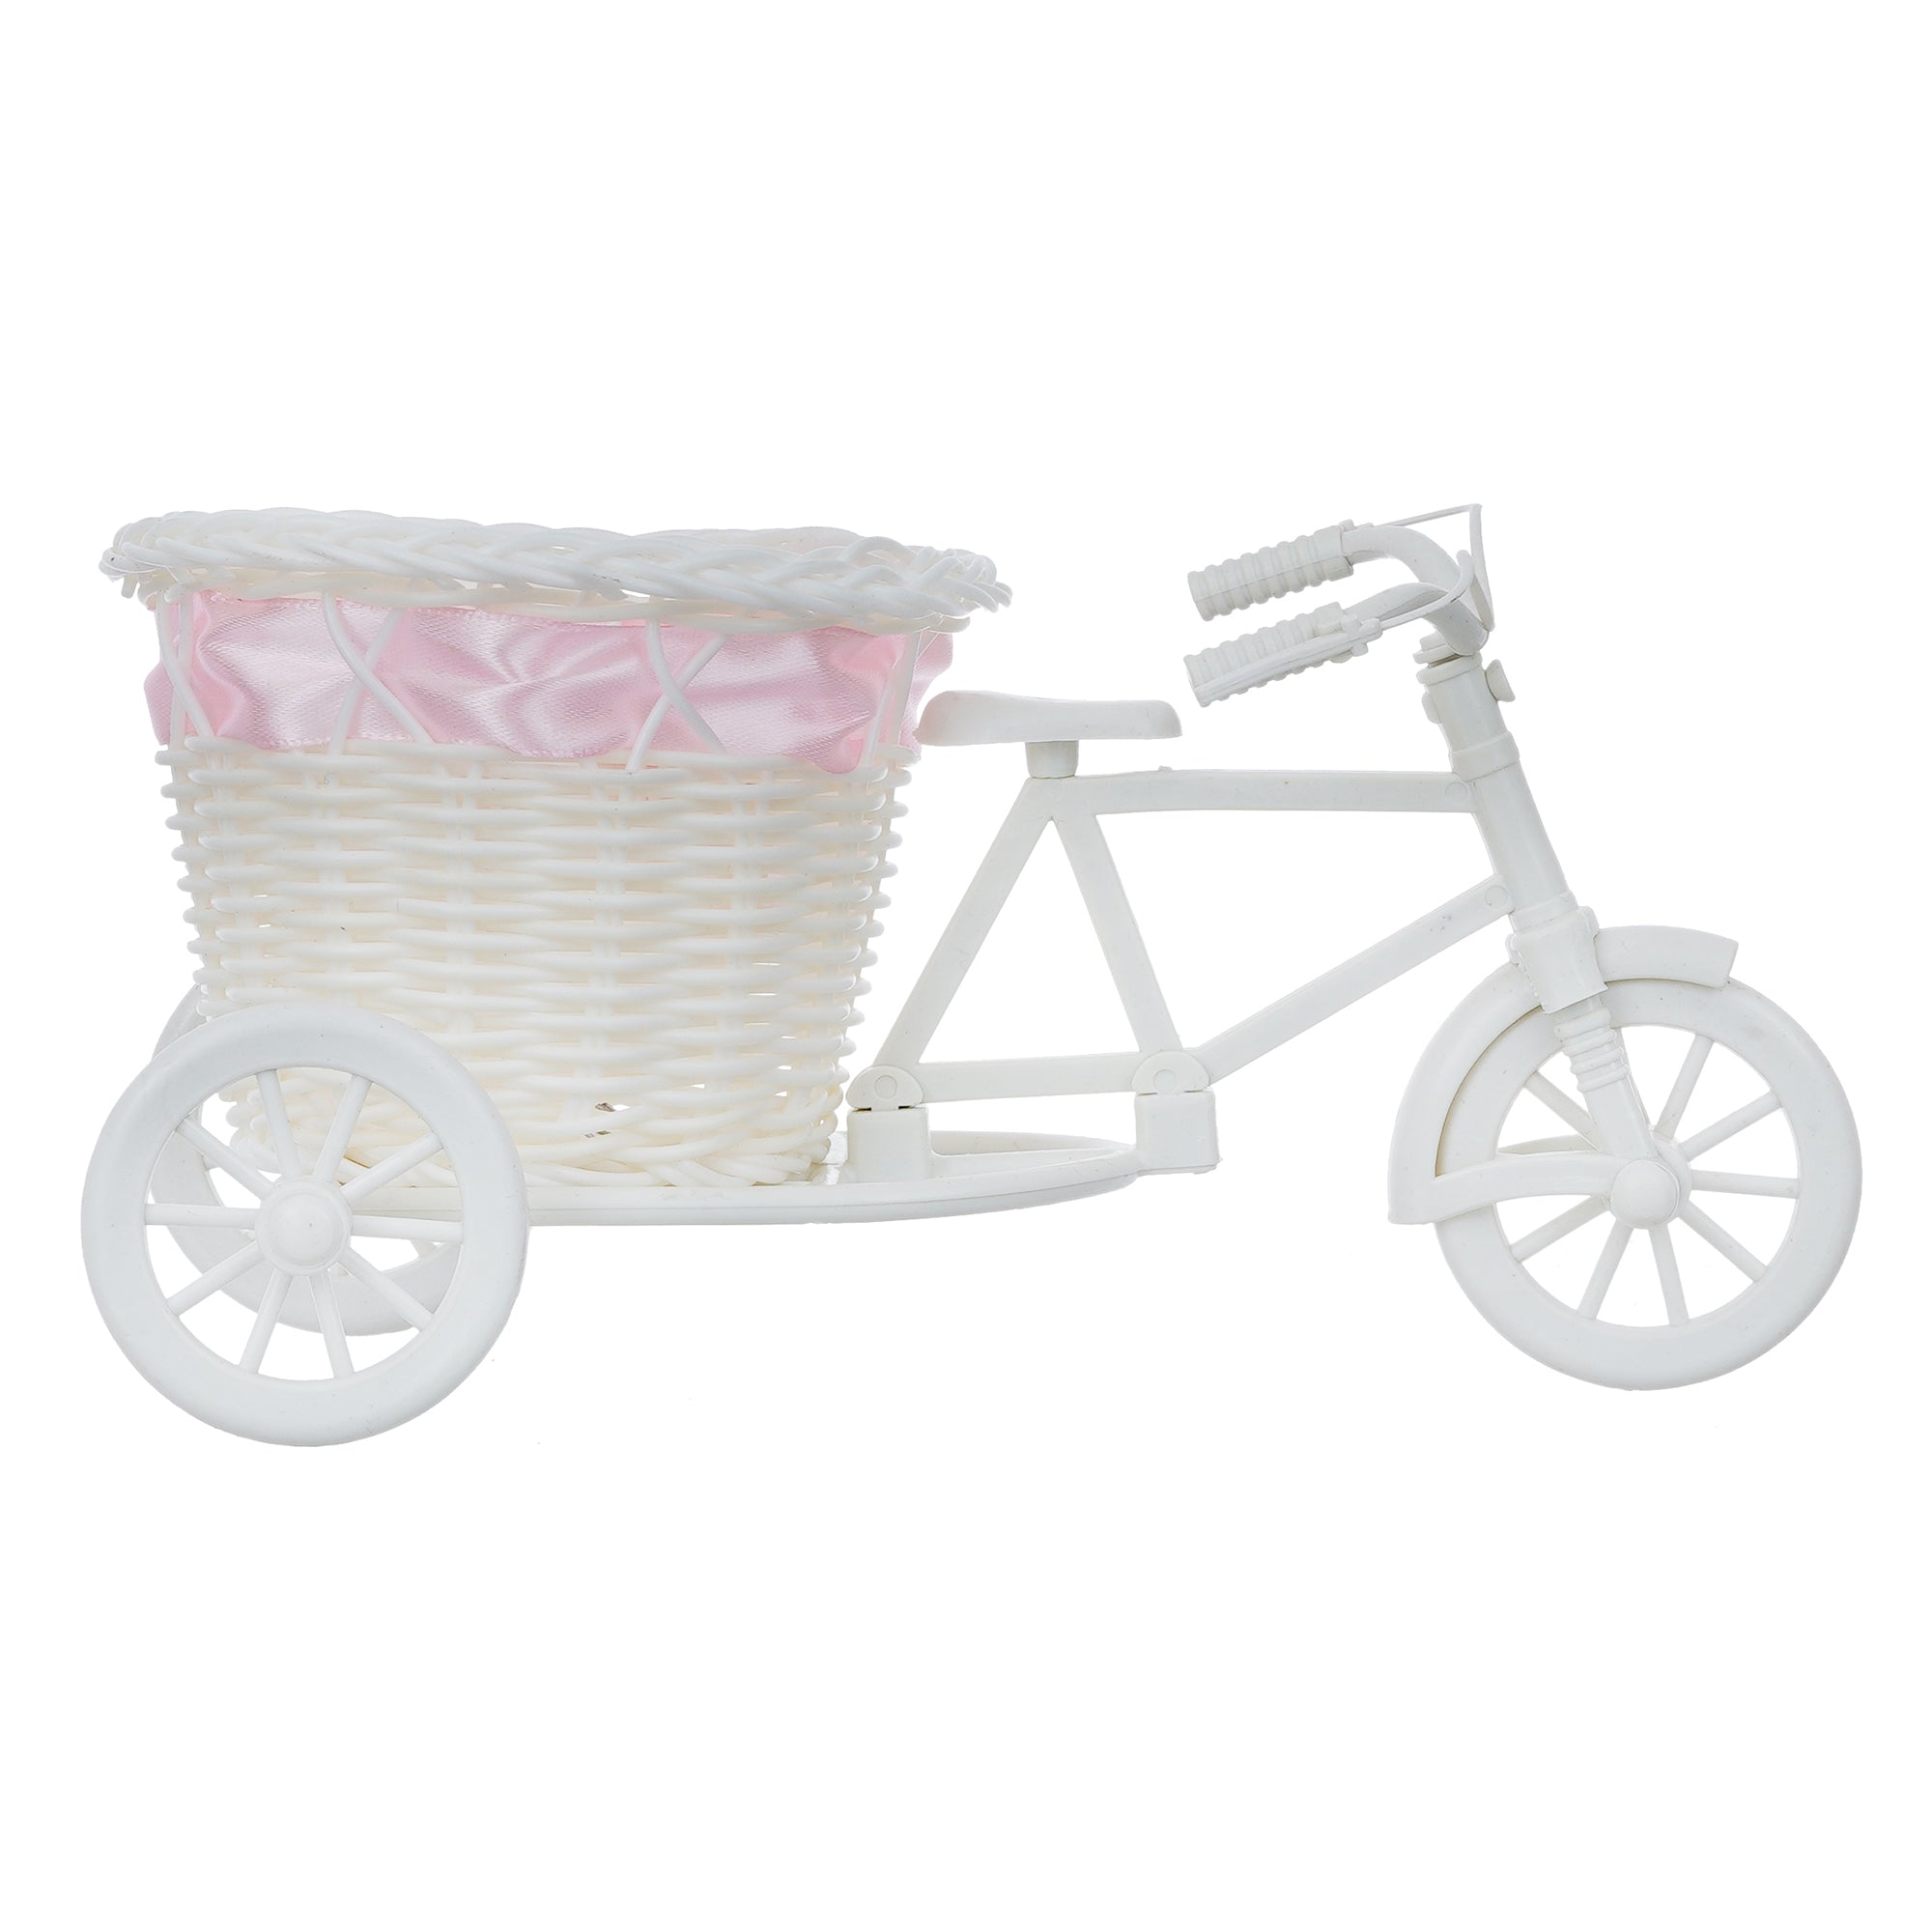 Pink and White Cycle Basket Showpiece 6